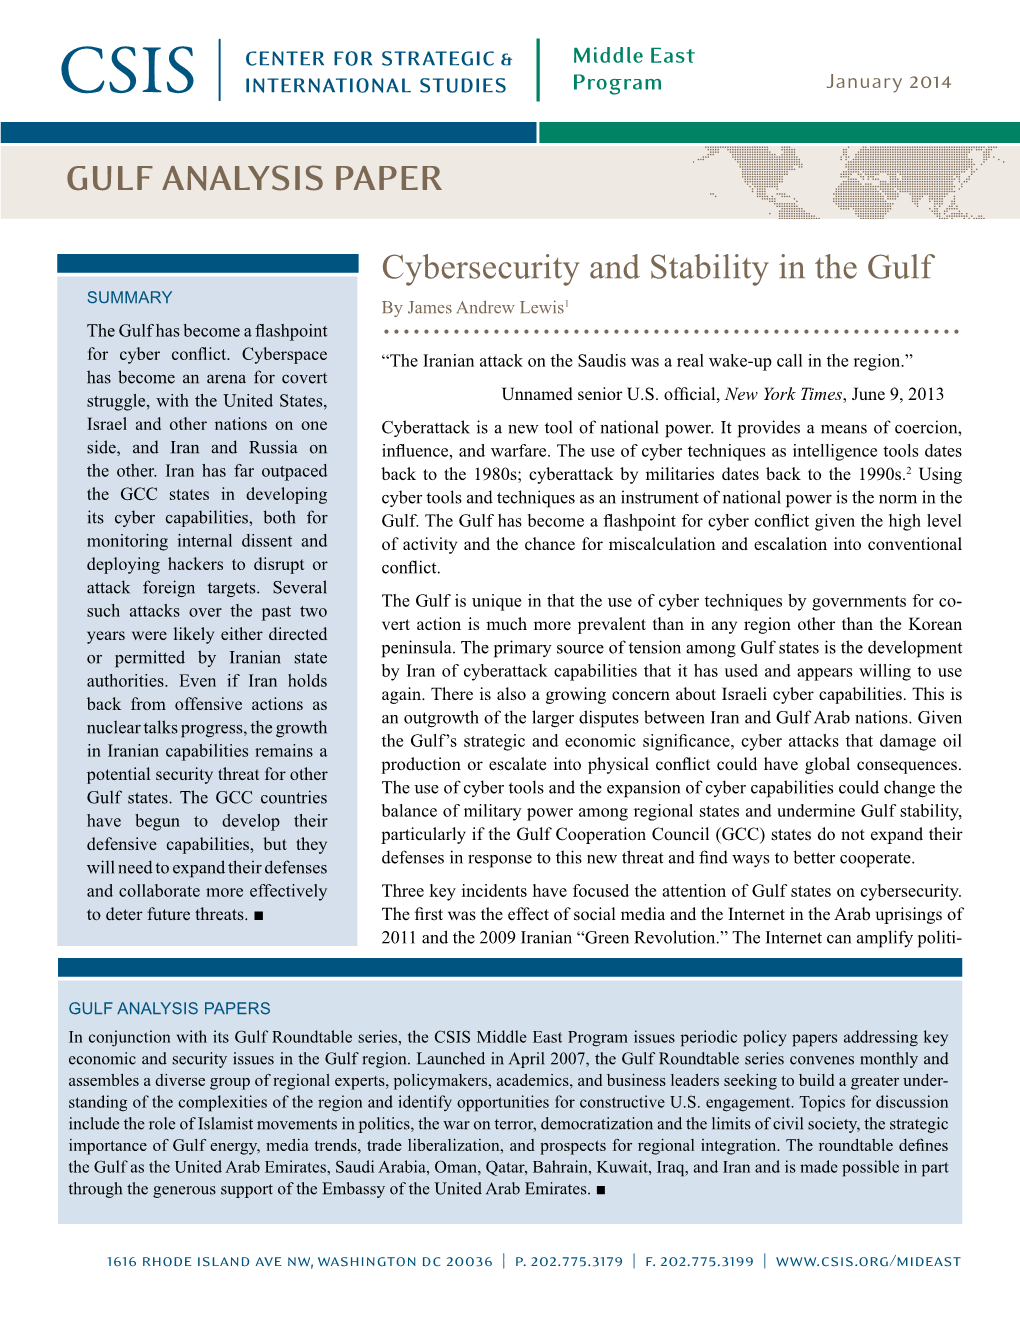 Cybersecurity and Stability in the Gulf Summary by James Andrew Lewis1 the Gulf Has Become a Flashpoint